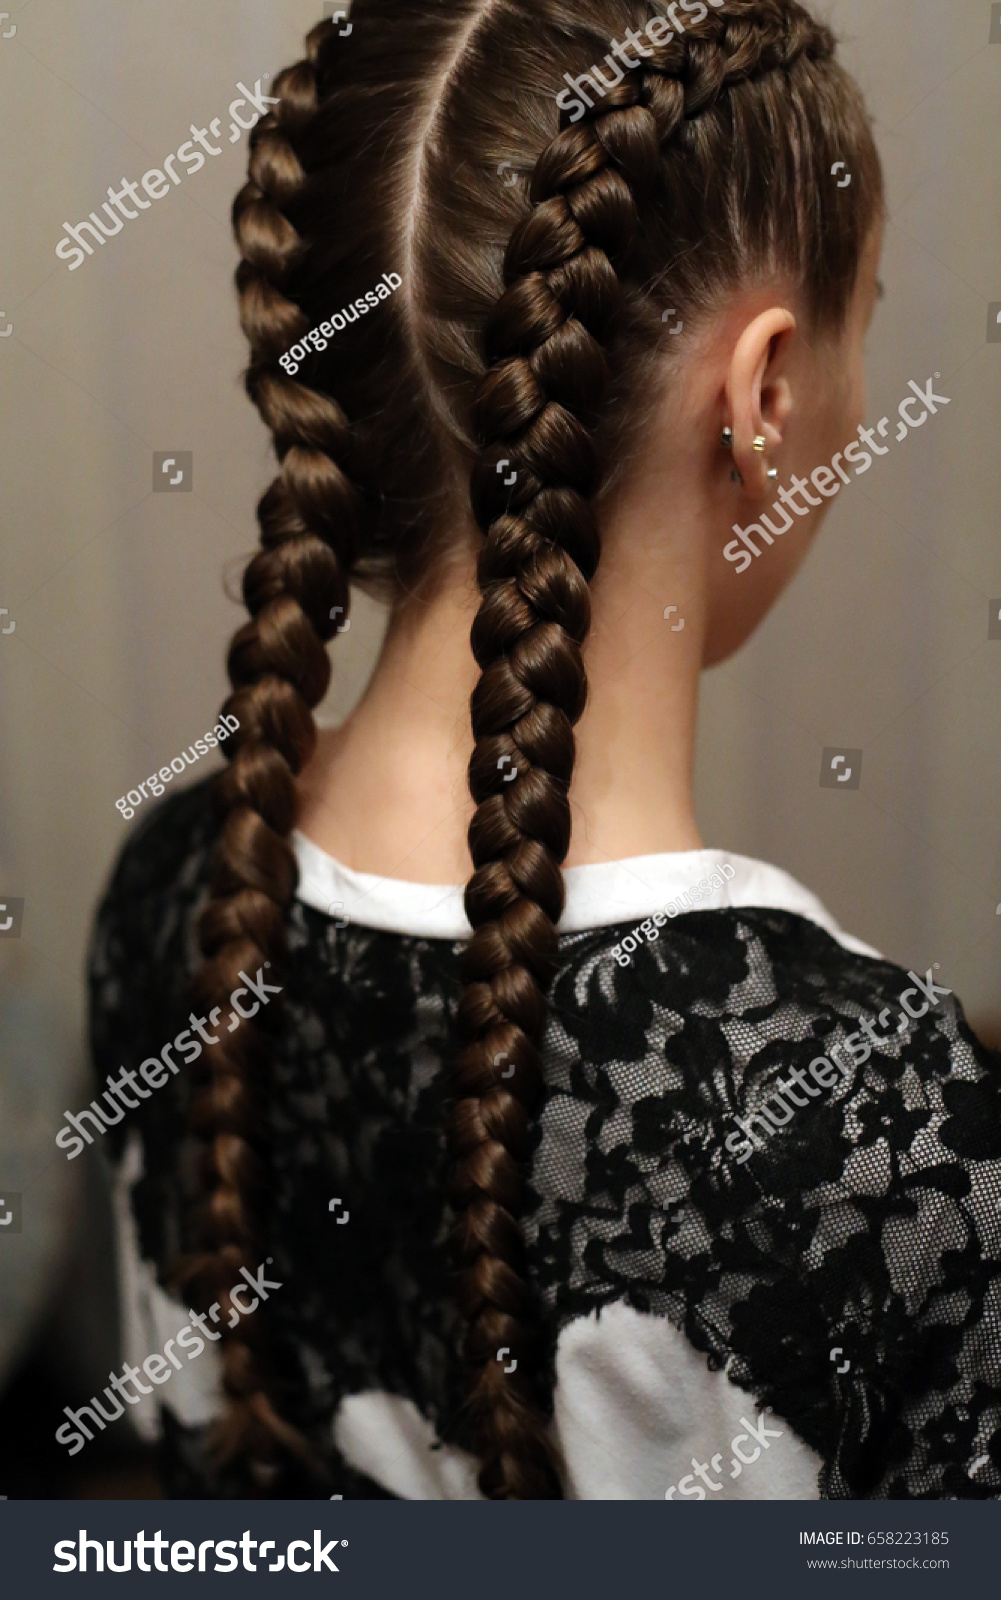 Girl Two Long Braids Hair Braided Stock Photo Edit Now